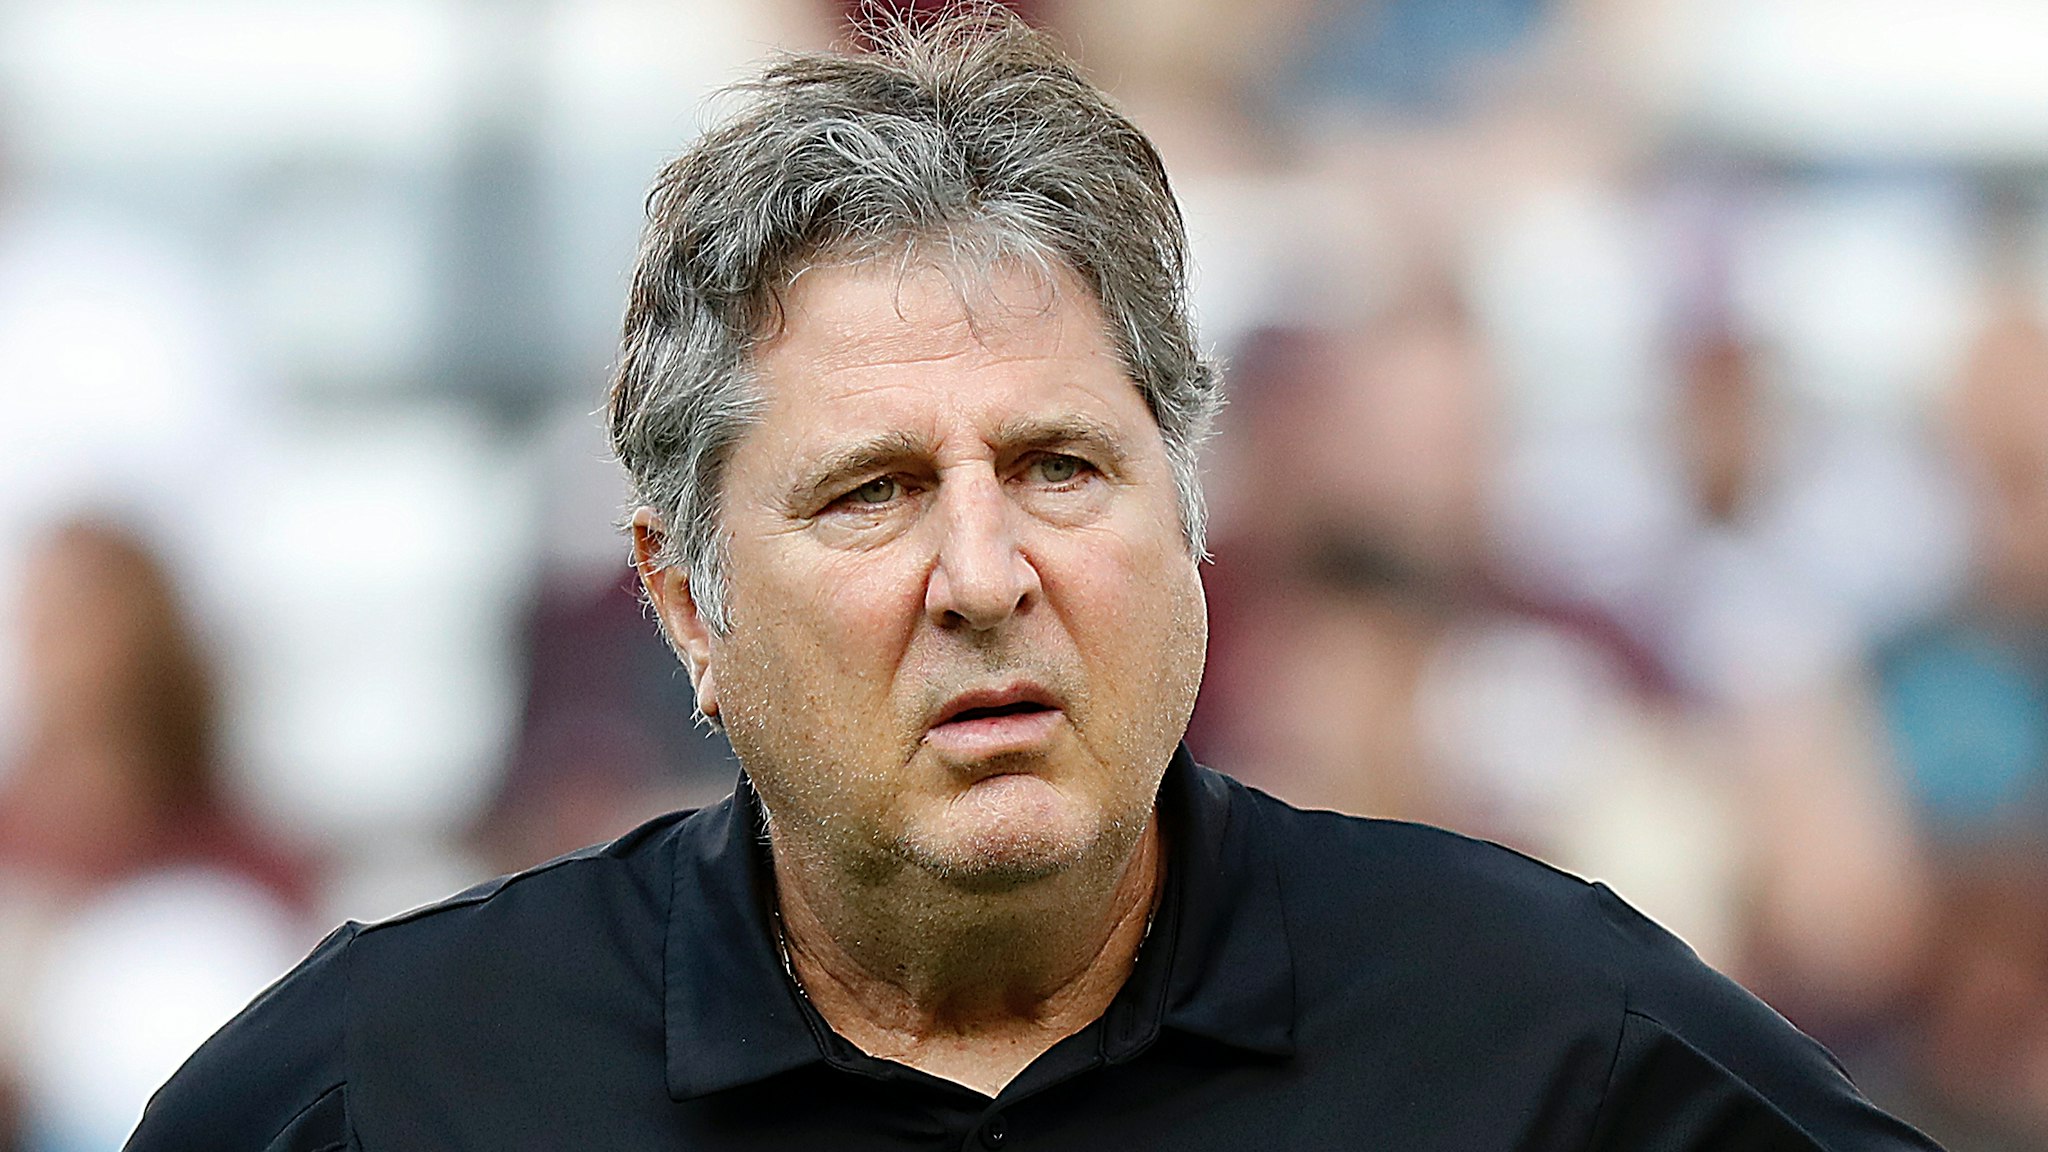 Head coach Mike Leach of the Mississippi State Bulldogs watches his playeres warm up before playing the Texas A&M Aggies at Kyle Field on October 02, 2021 in College Station, Texas.